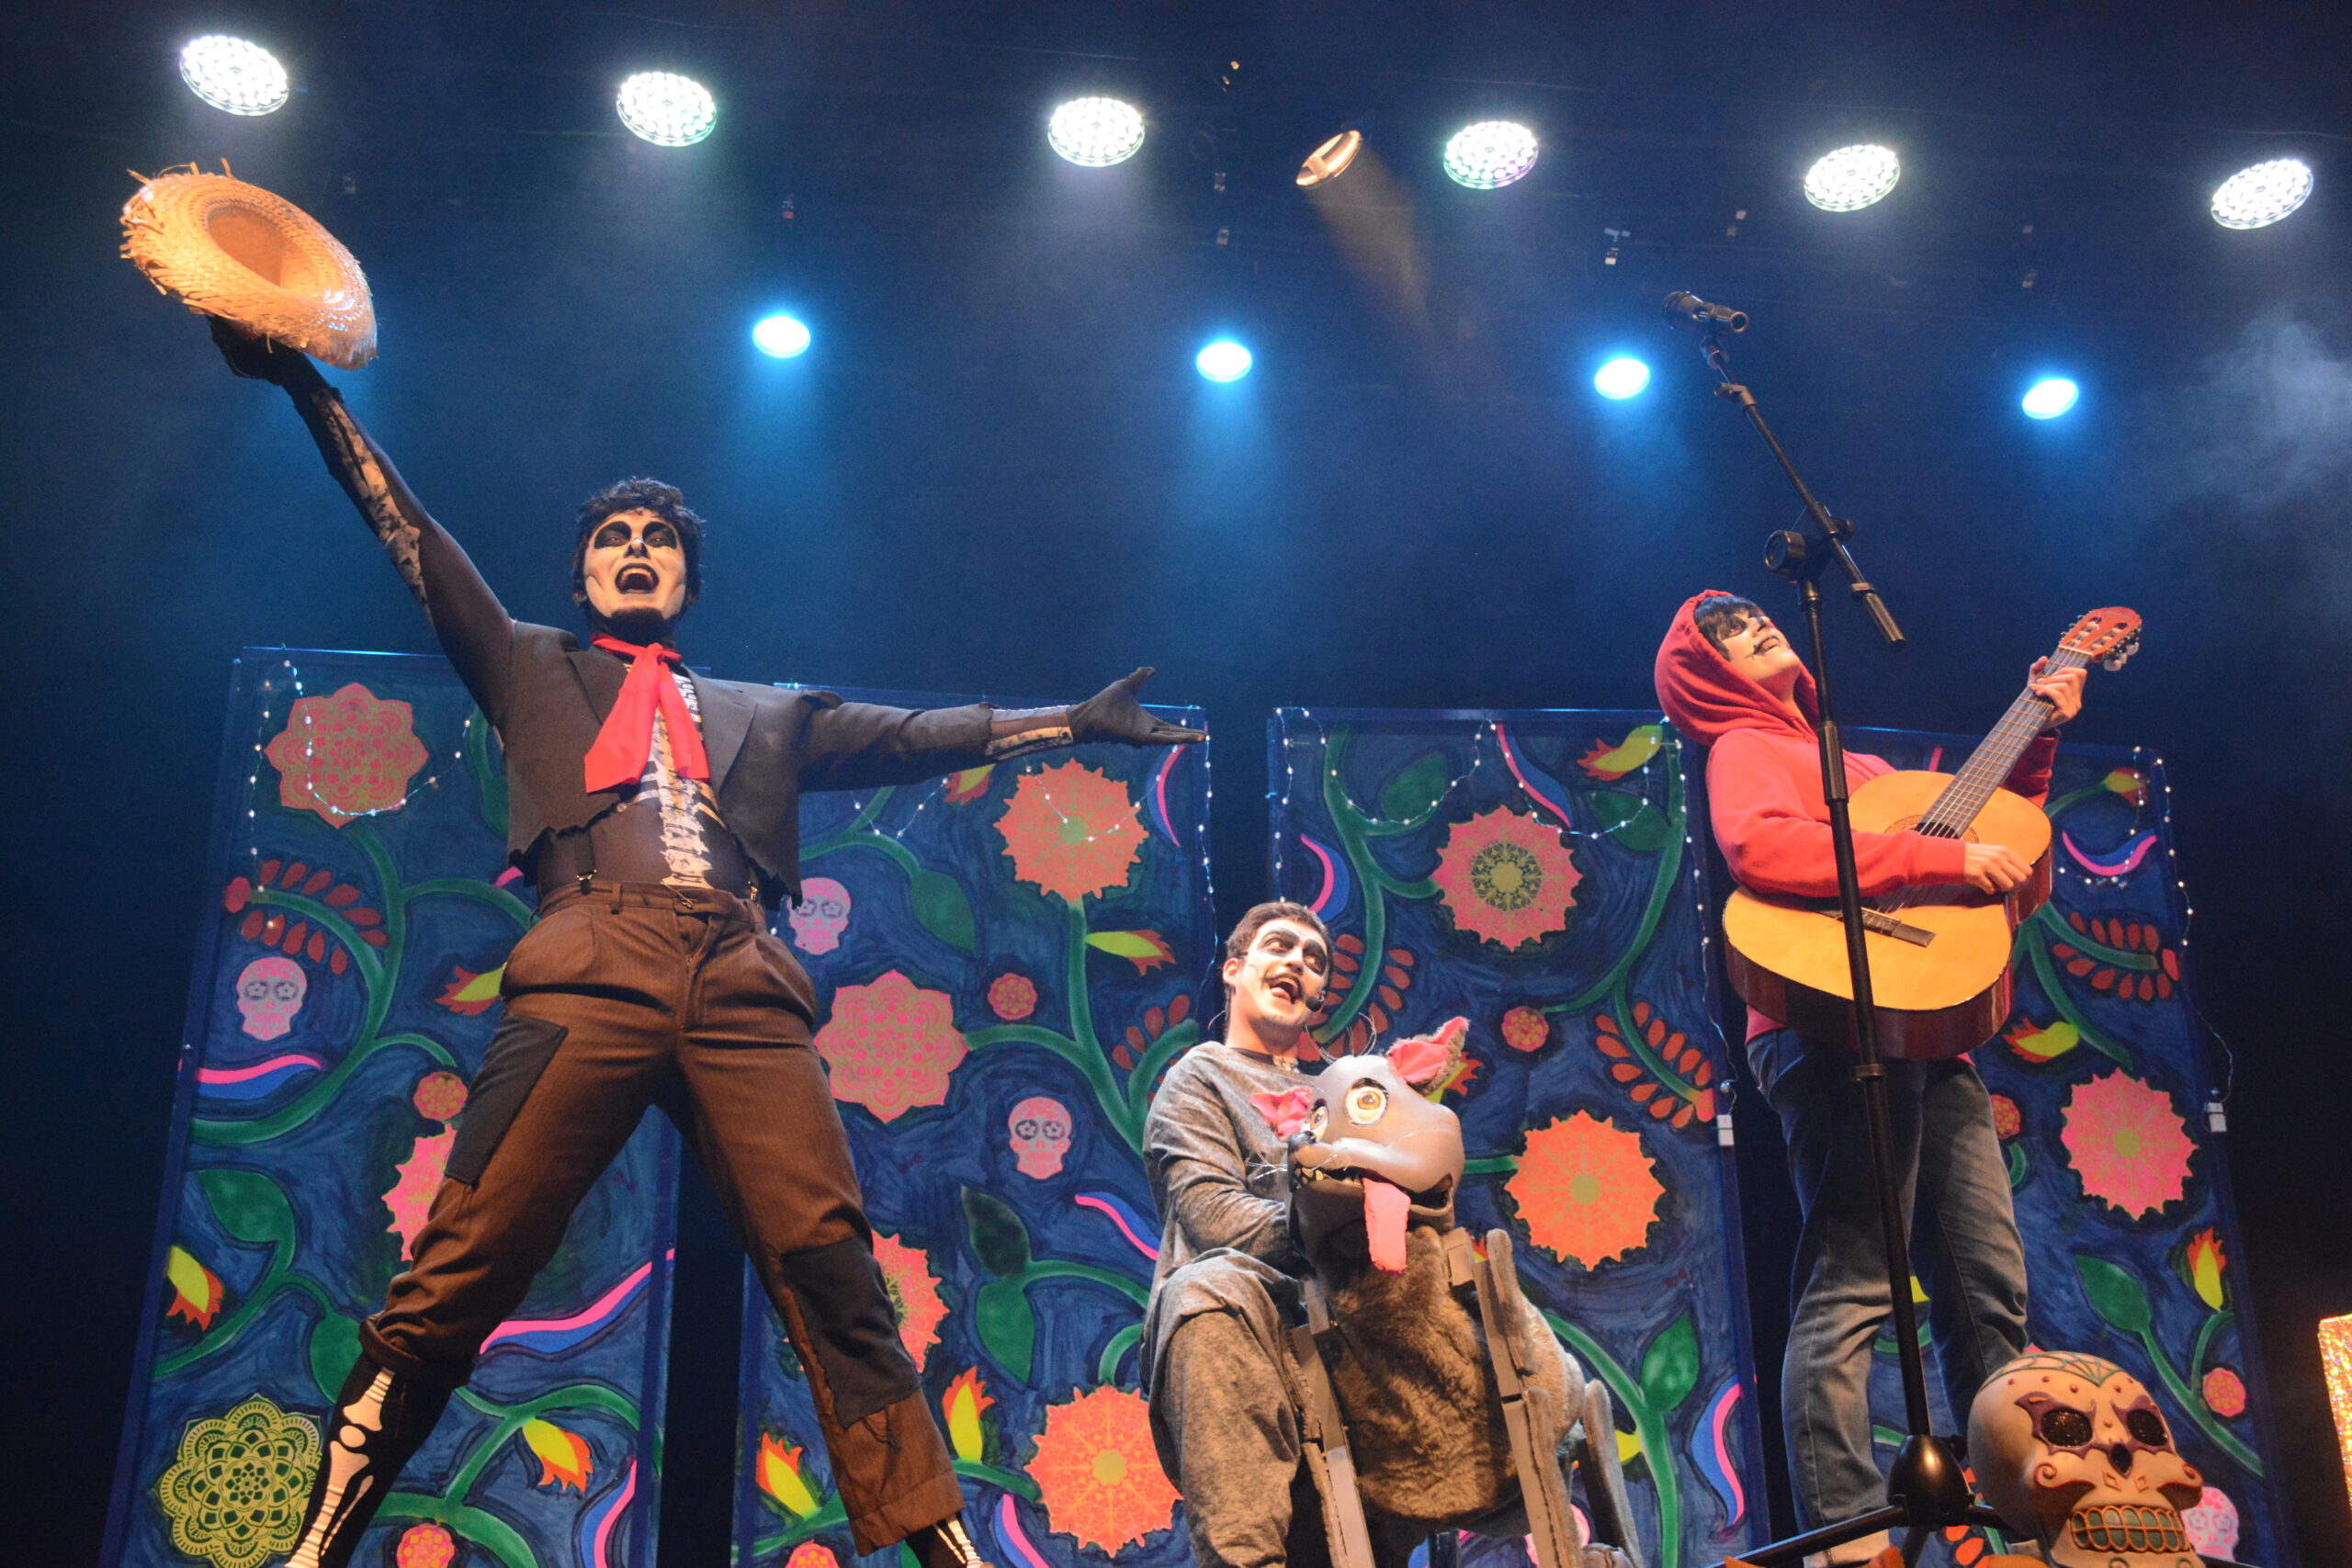 Coco, tributo musical llega a torrevieja